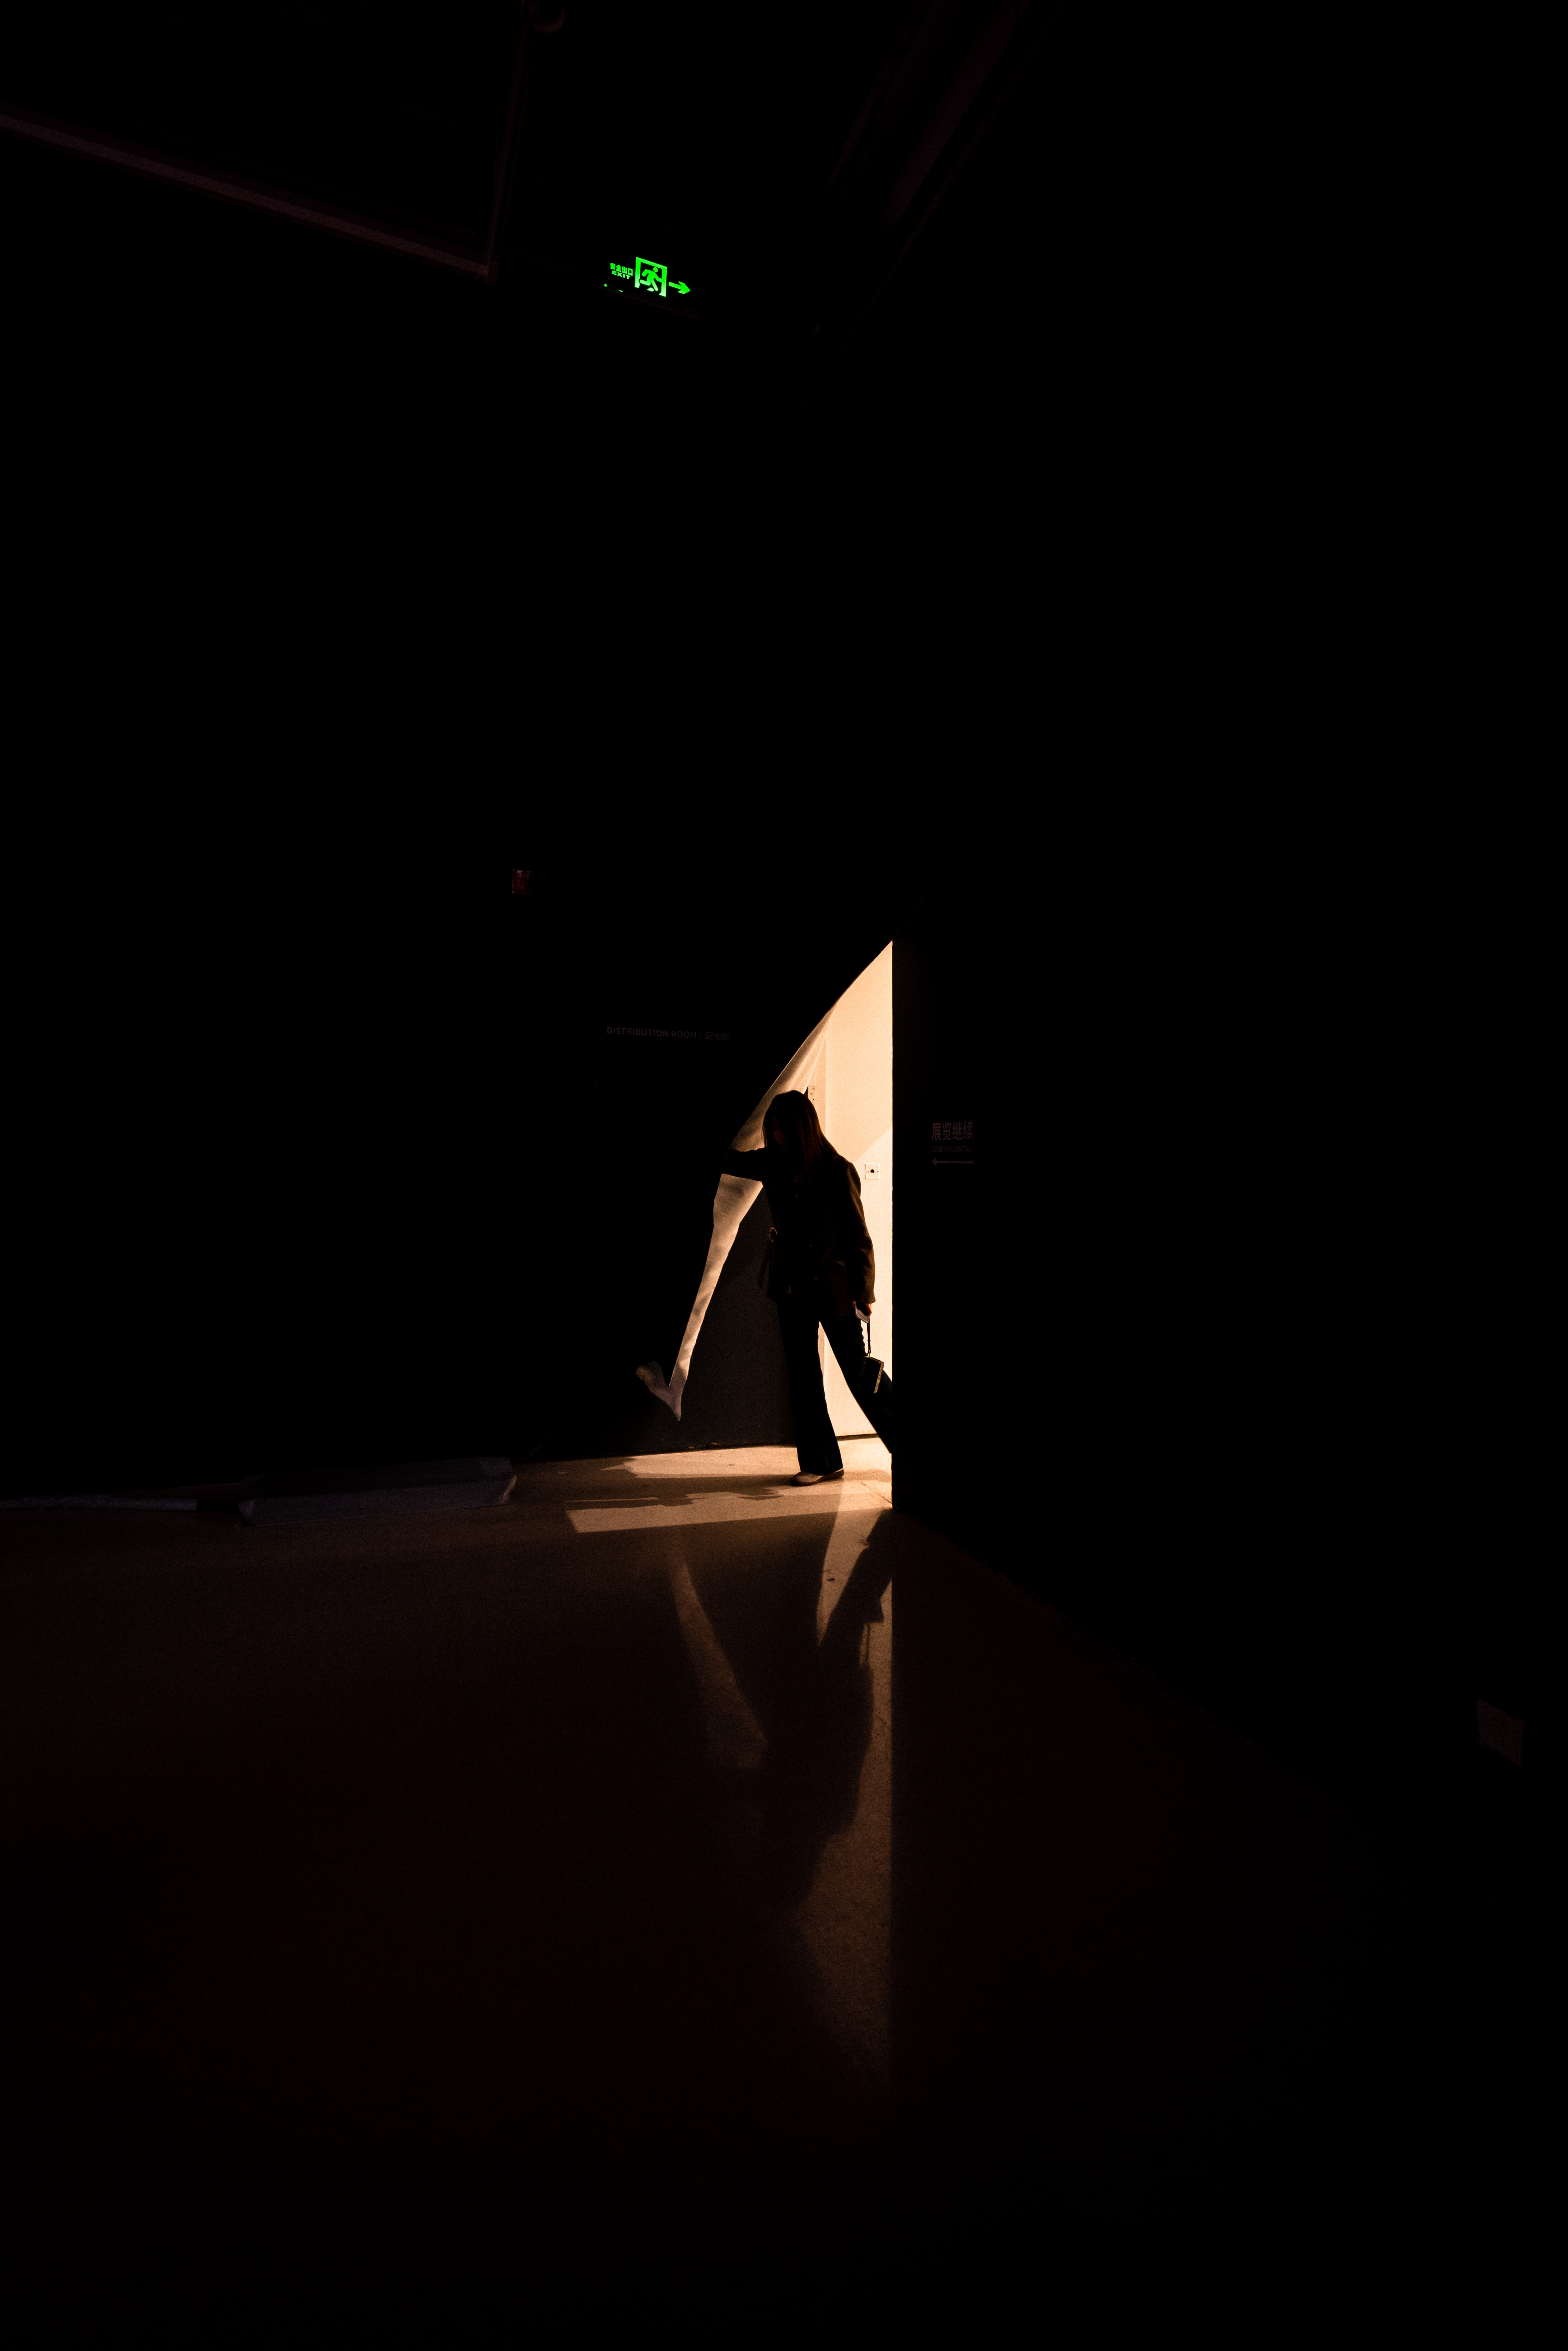 dark, shine, light, silhouette, darkness, human, person, output, exit